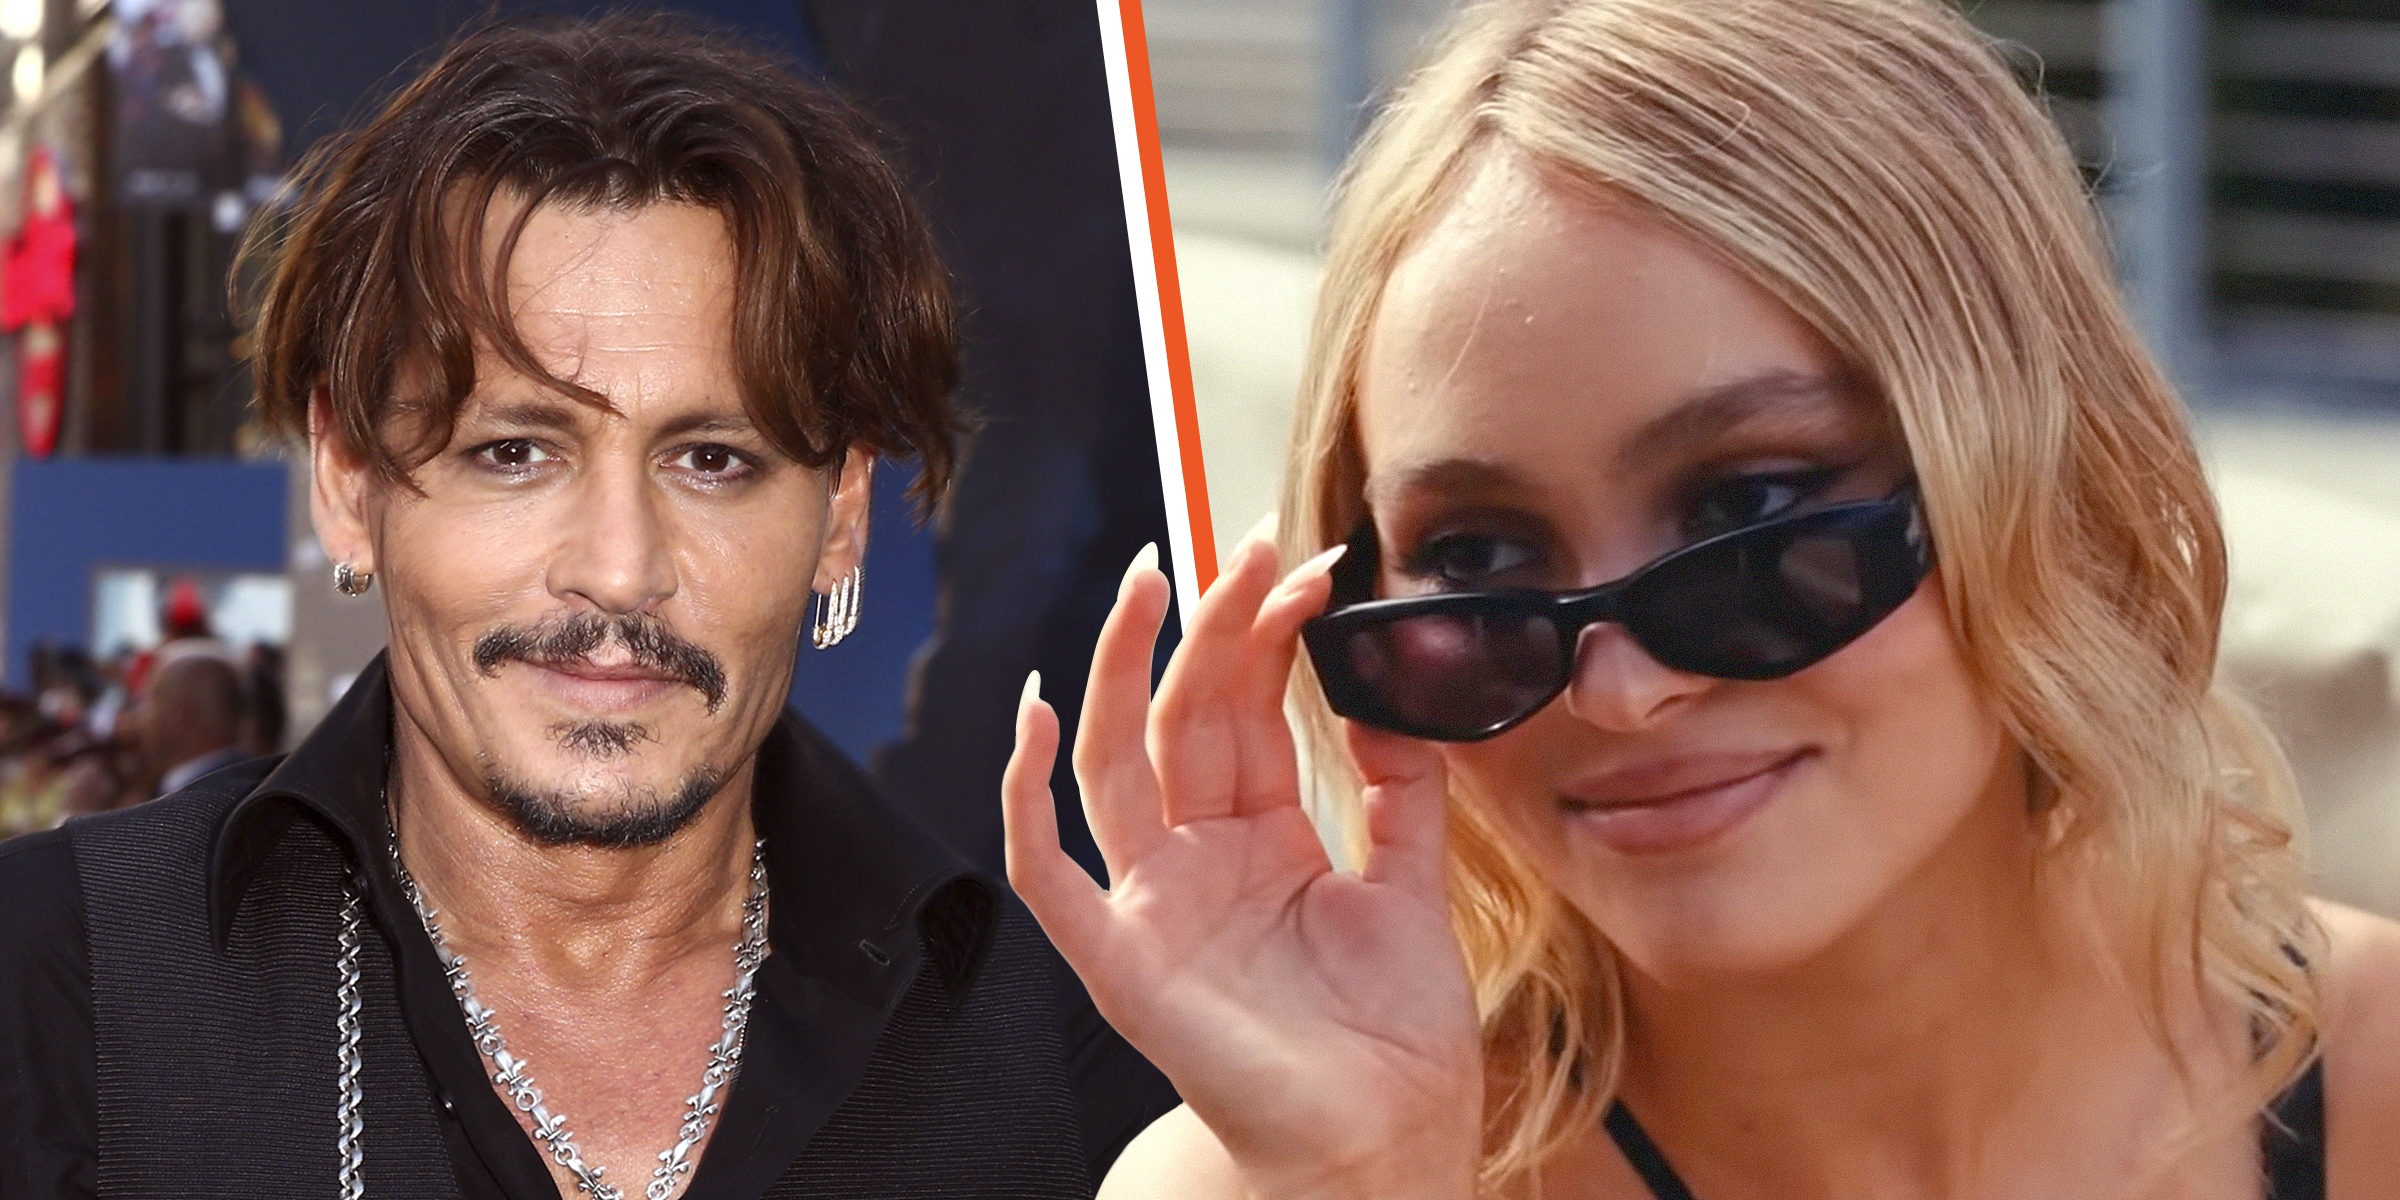 Johnny Depp | Lily-Rose Depp | Sources: Getty Images | youtube.com/HBO